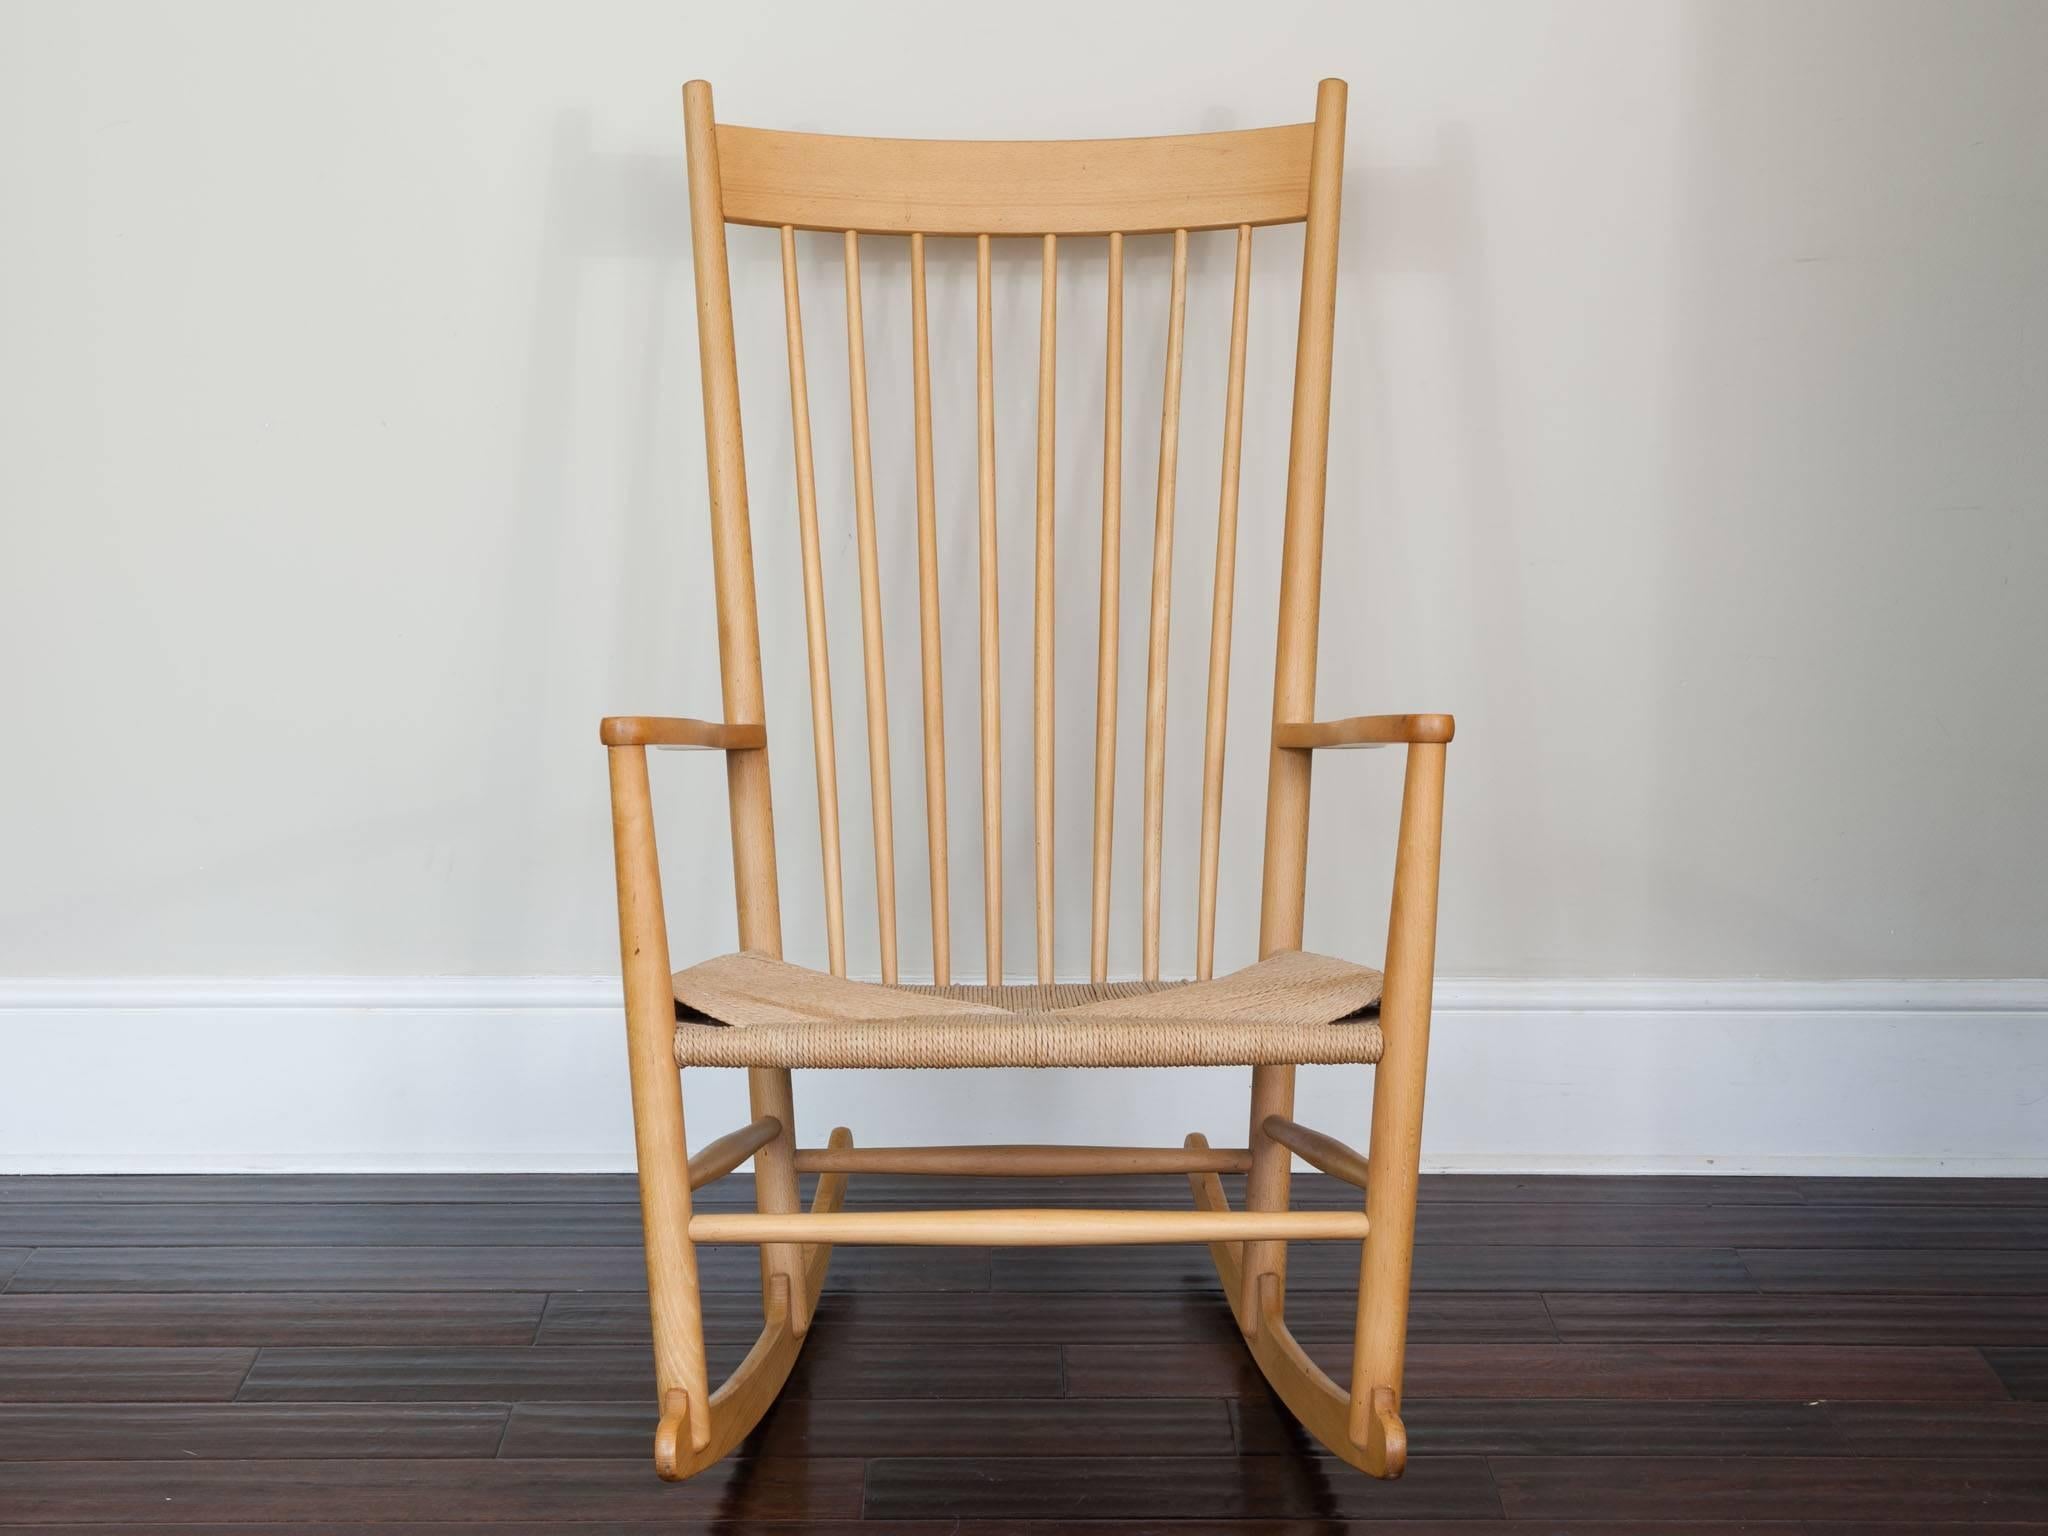 The J16 rocking chair is a timeless Classic designed by Hans J. Wegner and introduced by FDB Furniture in 1944. The chair is still in production and over £1,800 for the latest version. This particular rocking chair is made from beech with a